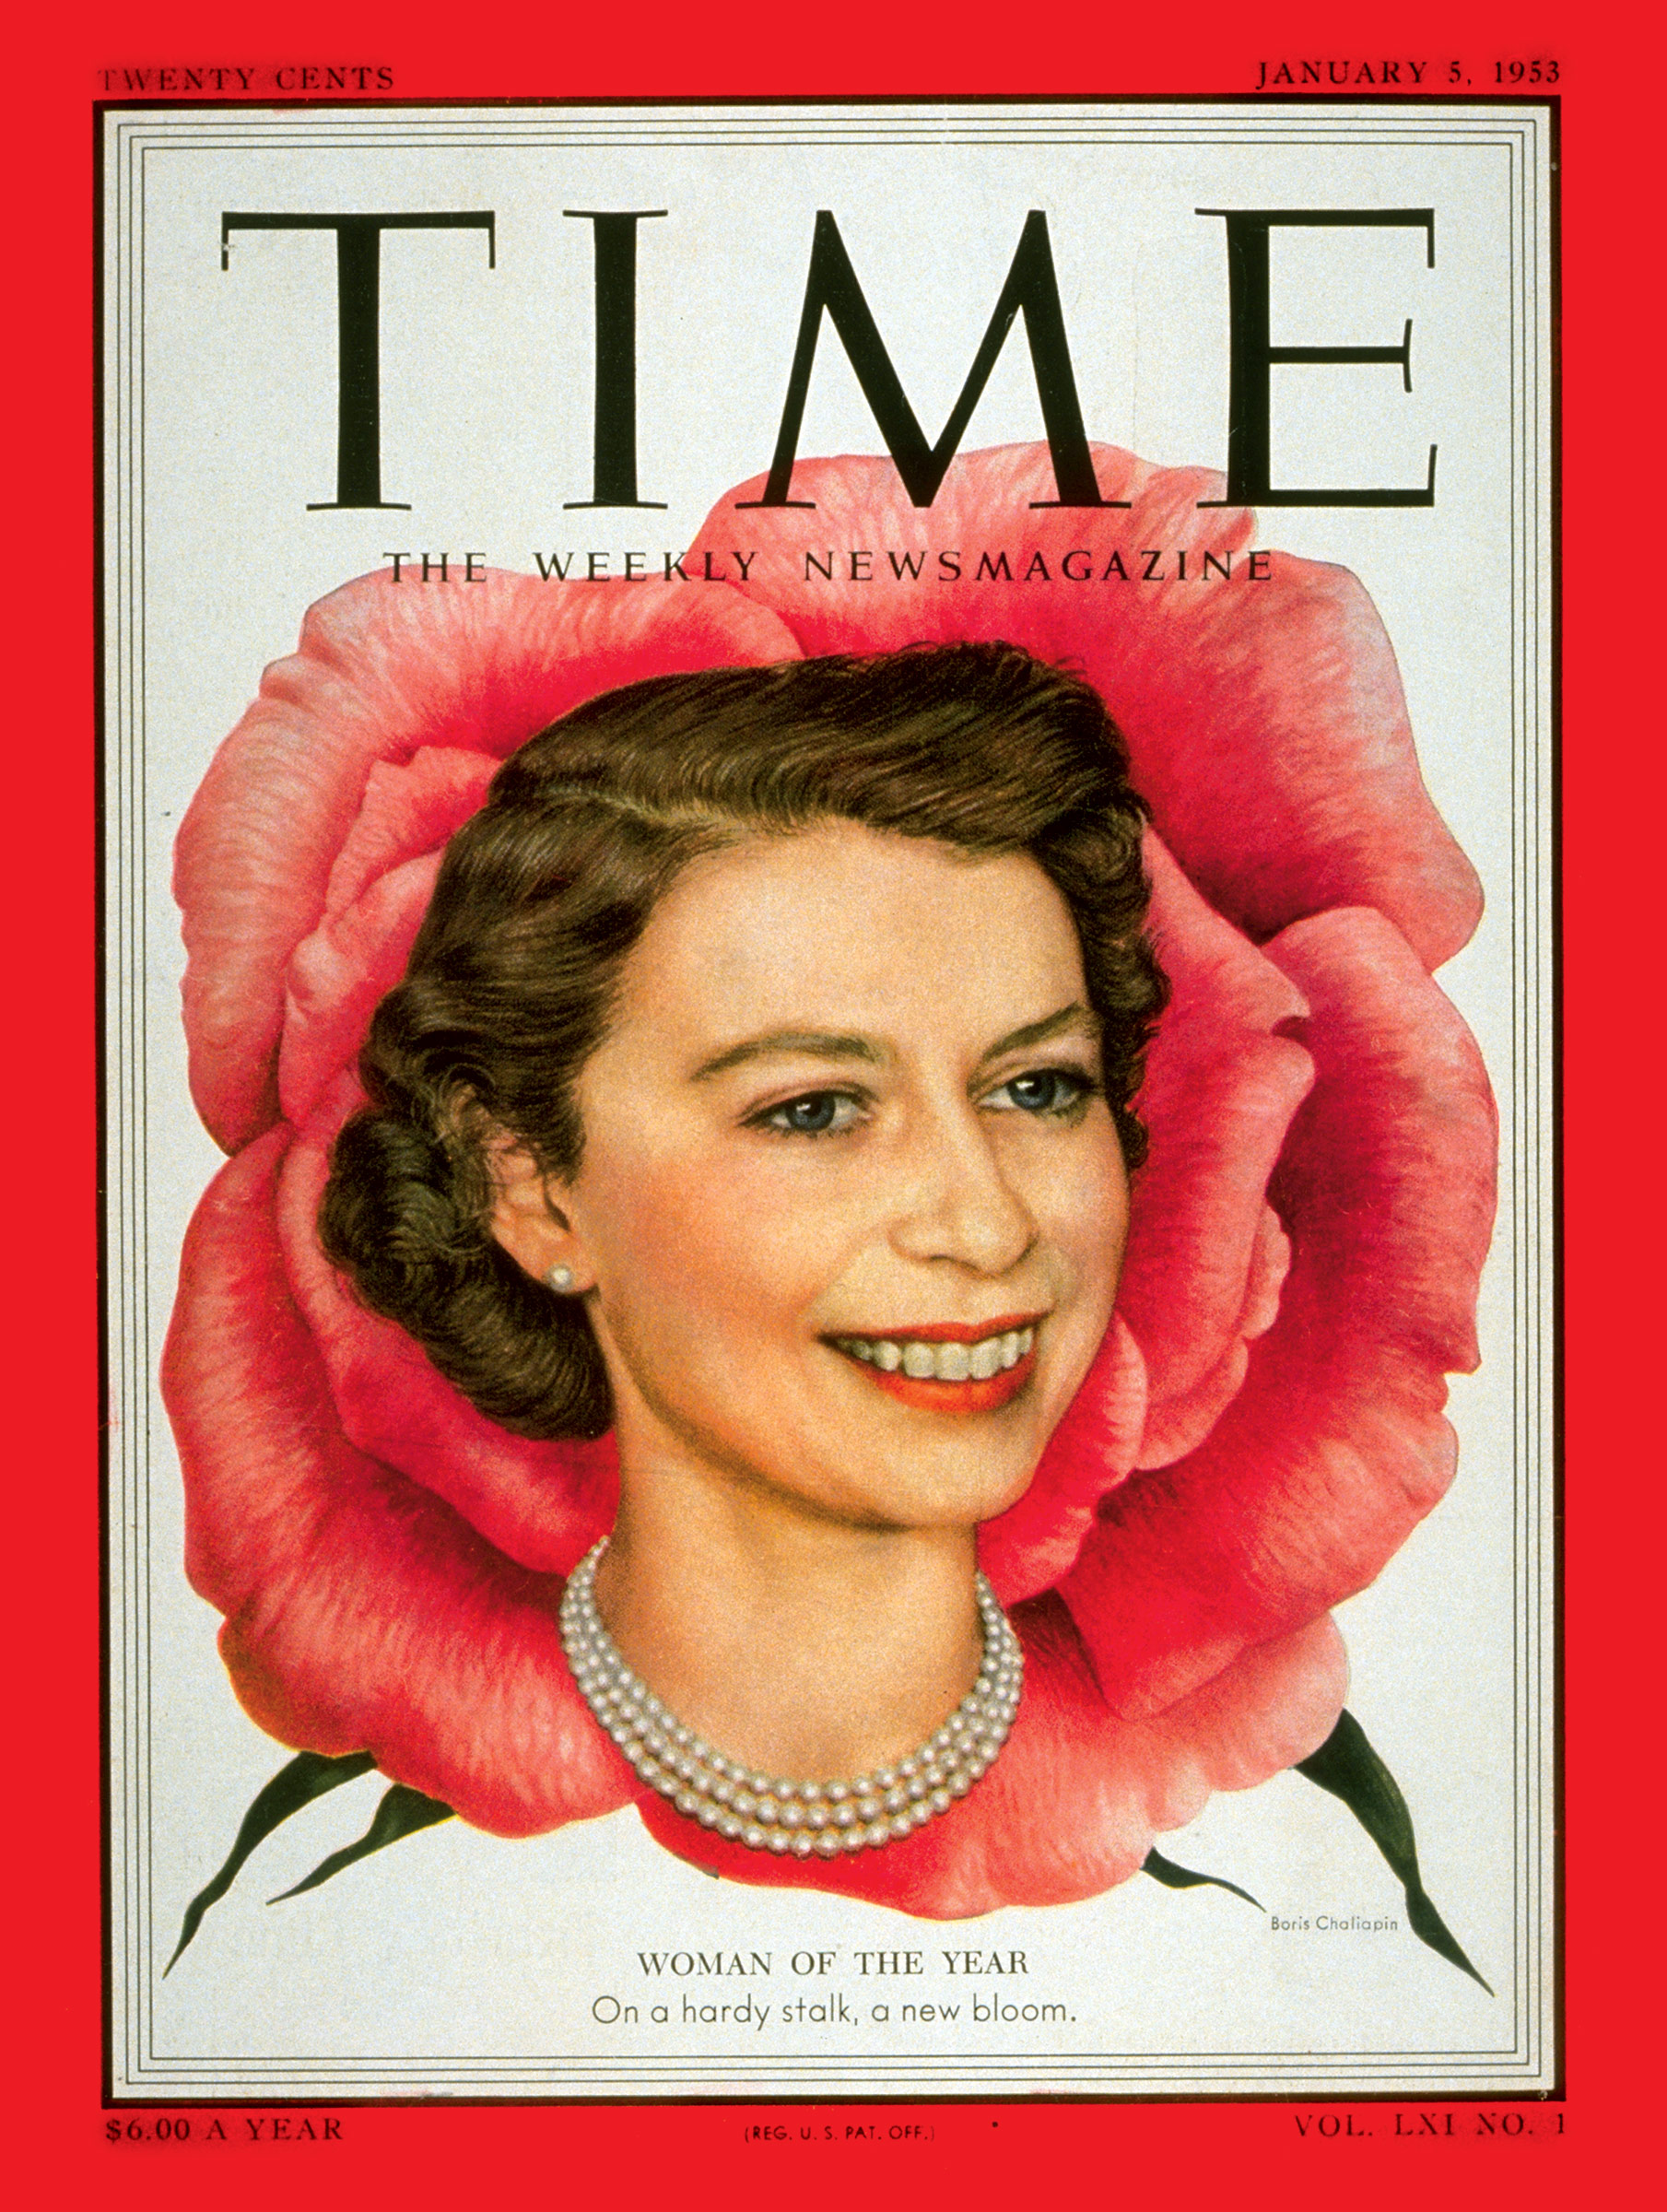 Queen Elizabeth, as Person of the Year for 1952, on the Jan. 5, 1953, cover of TIME